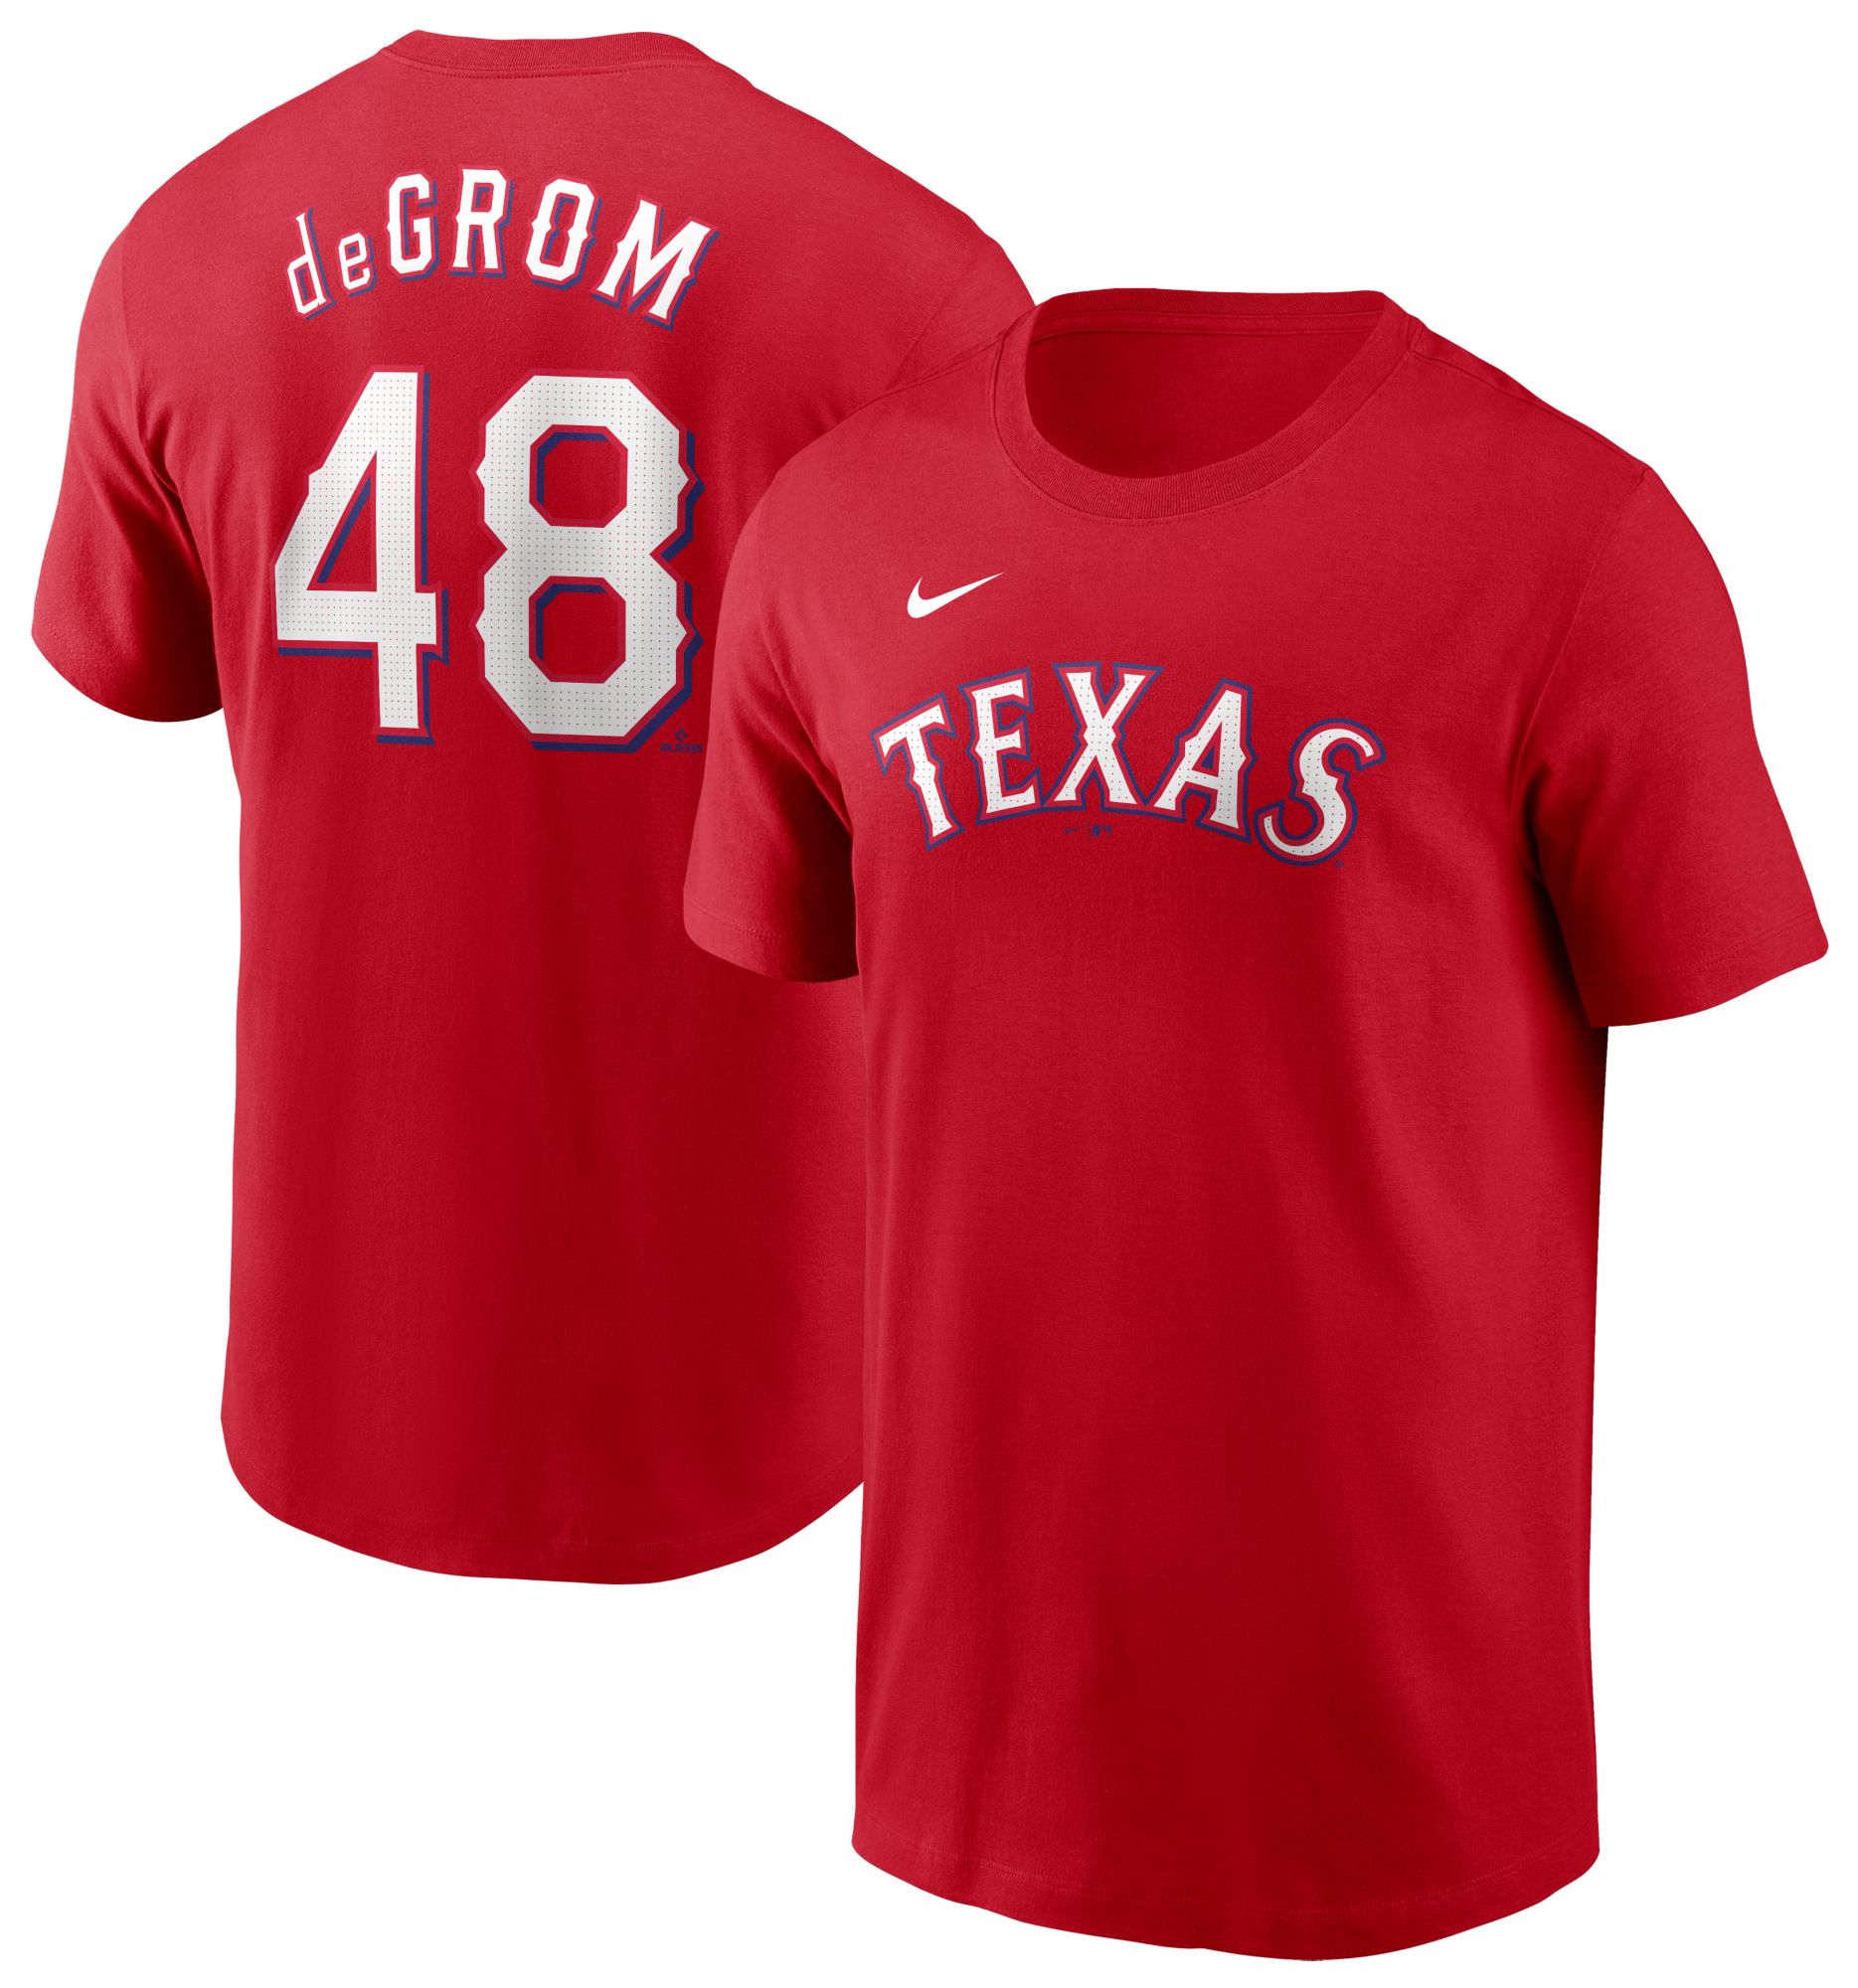 New York Mets No48 Jacob DeGrom Grey Cool Base Stitched Youth MLB Jersey